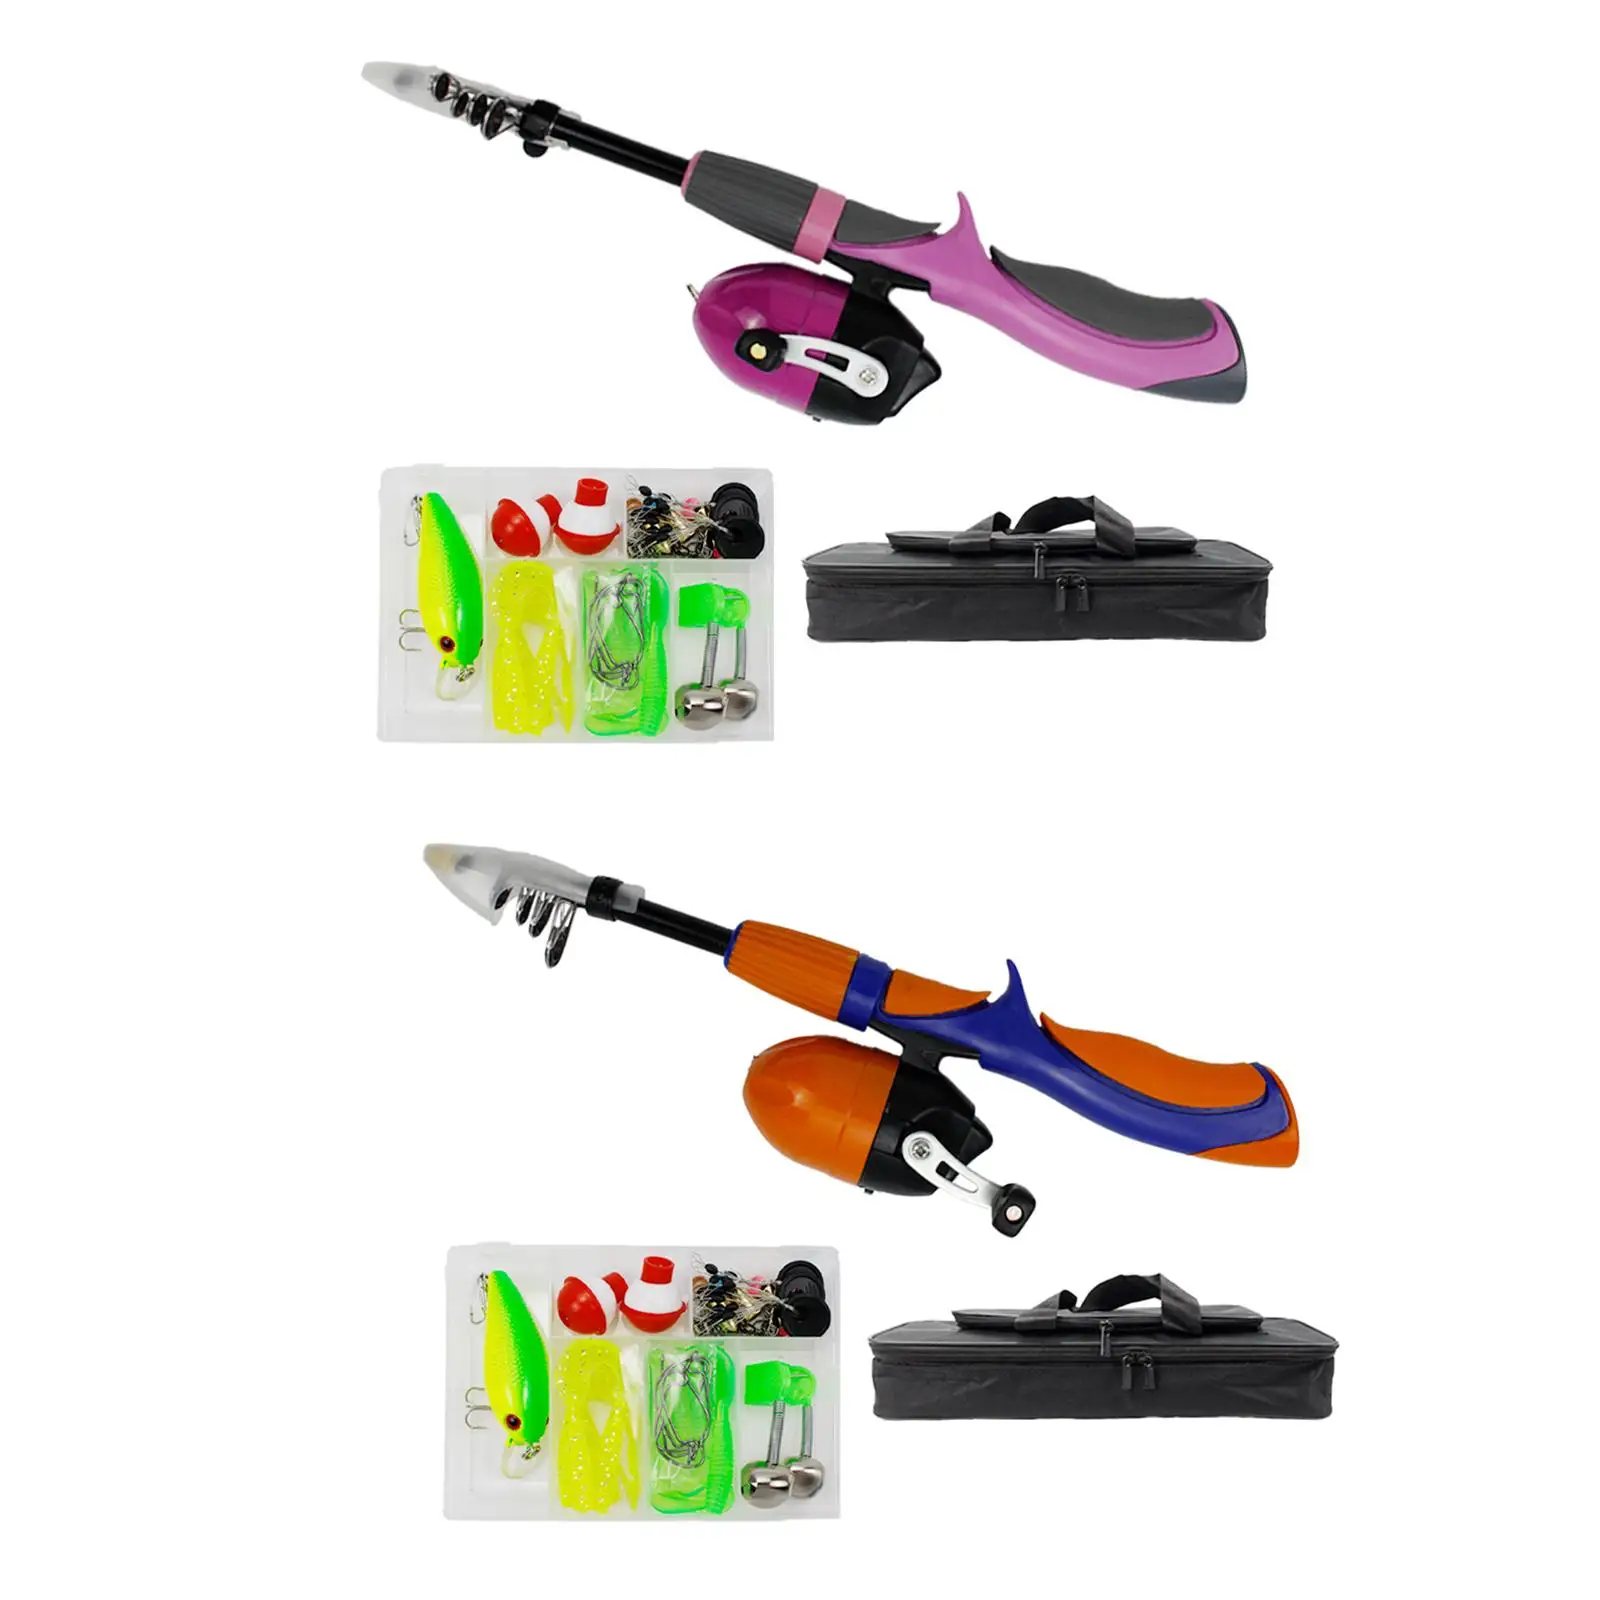 Portable Kids Fishing Pole Telescopic Fishing Rod with Reel  Travel Tote with Fishing Line Accessories Ultralight for Girls